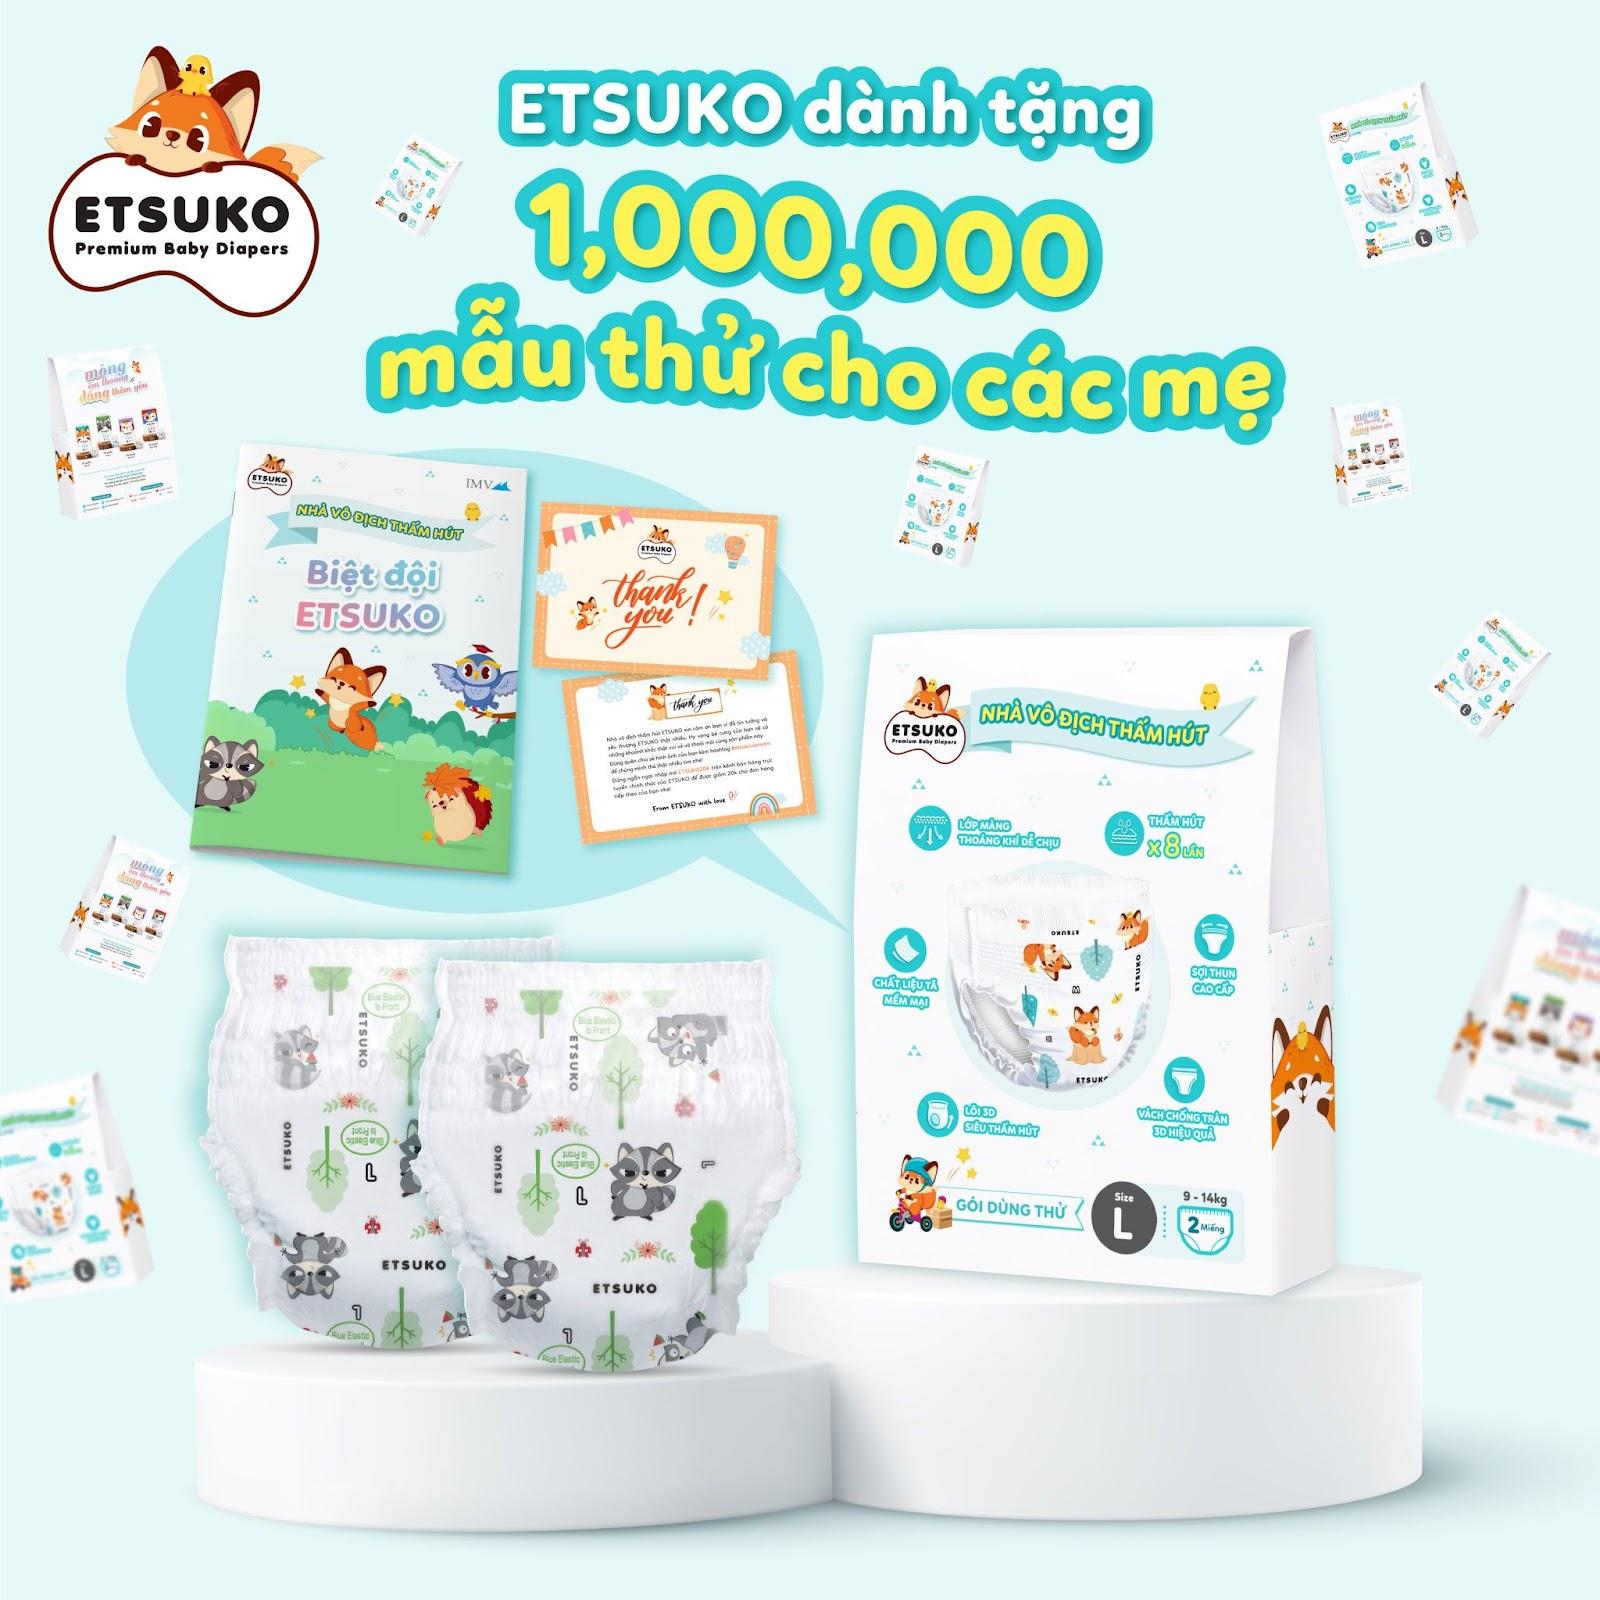 ETSUKO diapers officially entered the Vietnamese market with great deals - Photo 4.